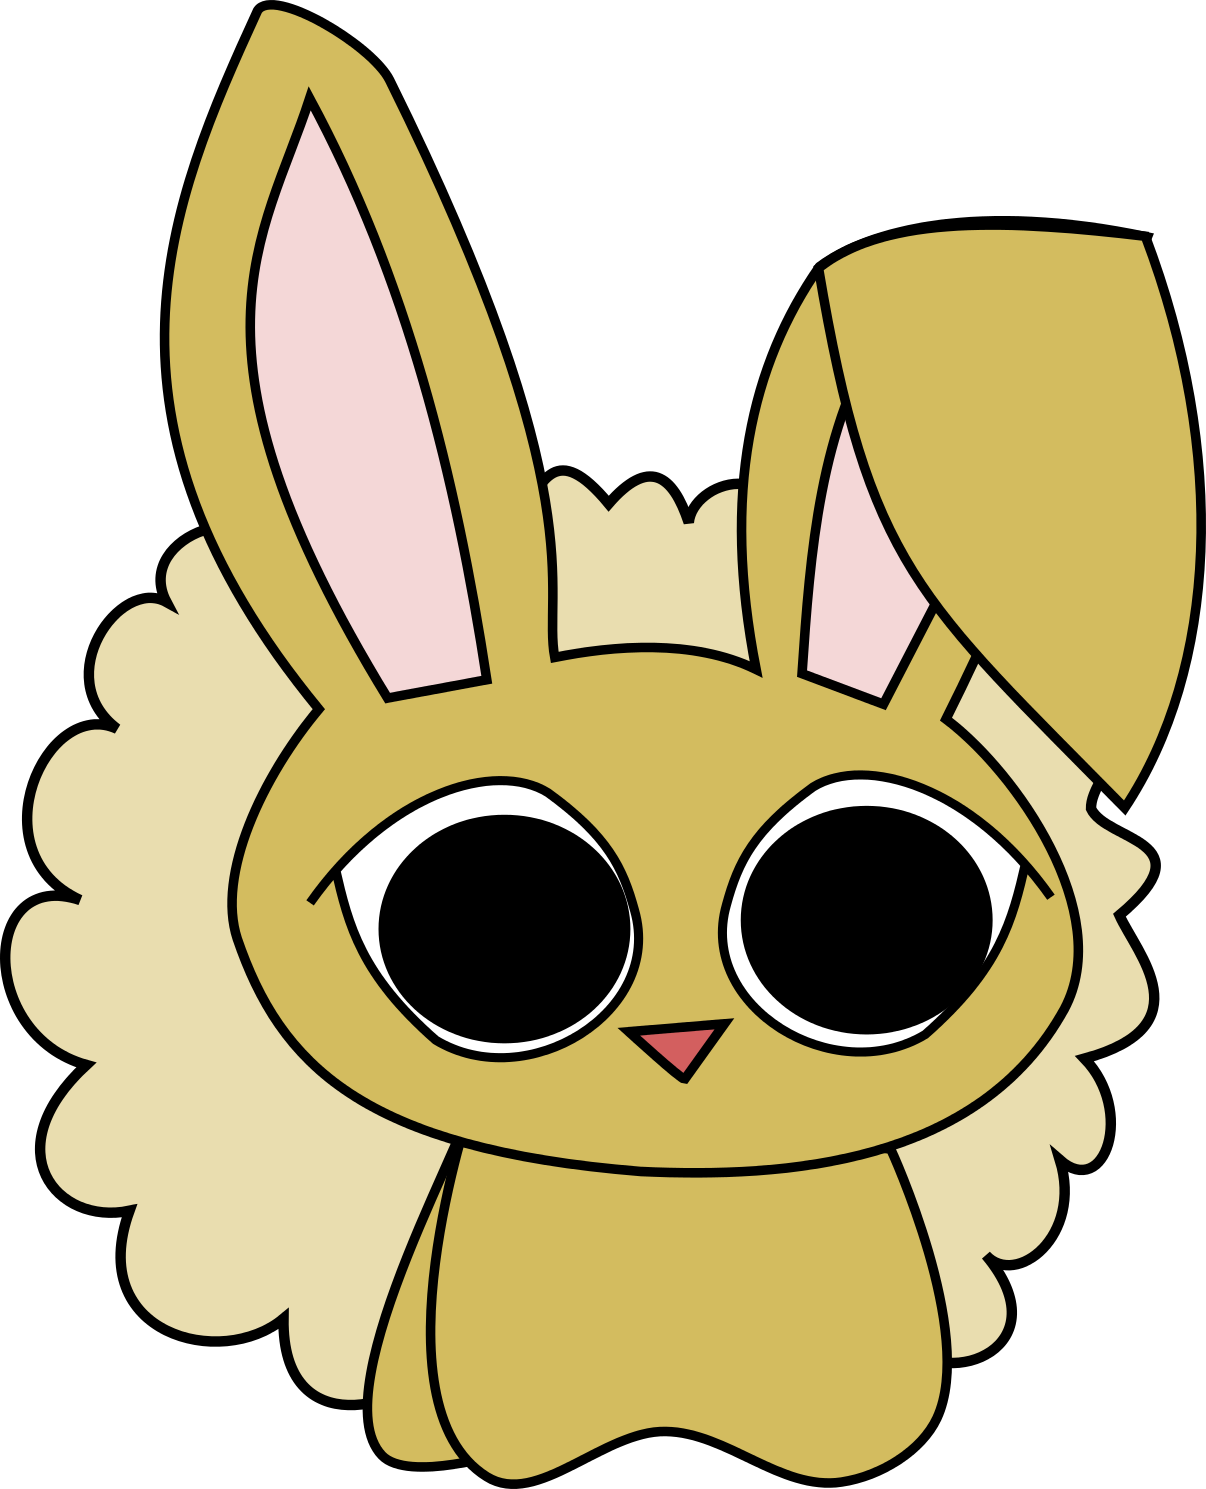 promotional-materials/bunny.png